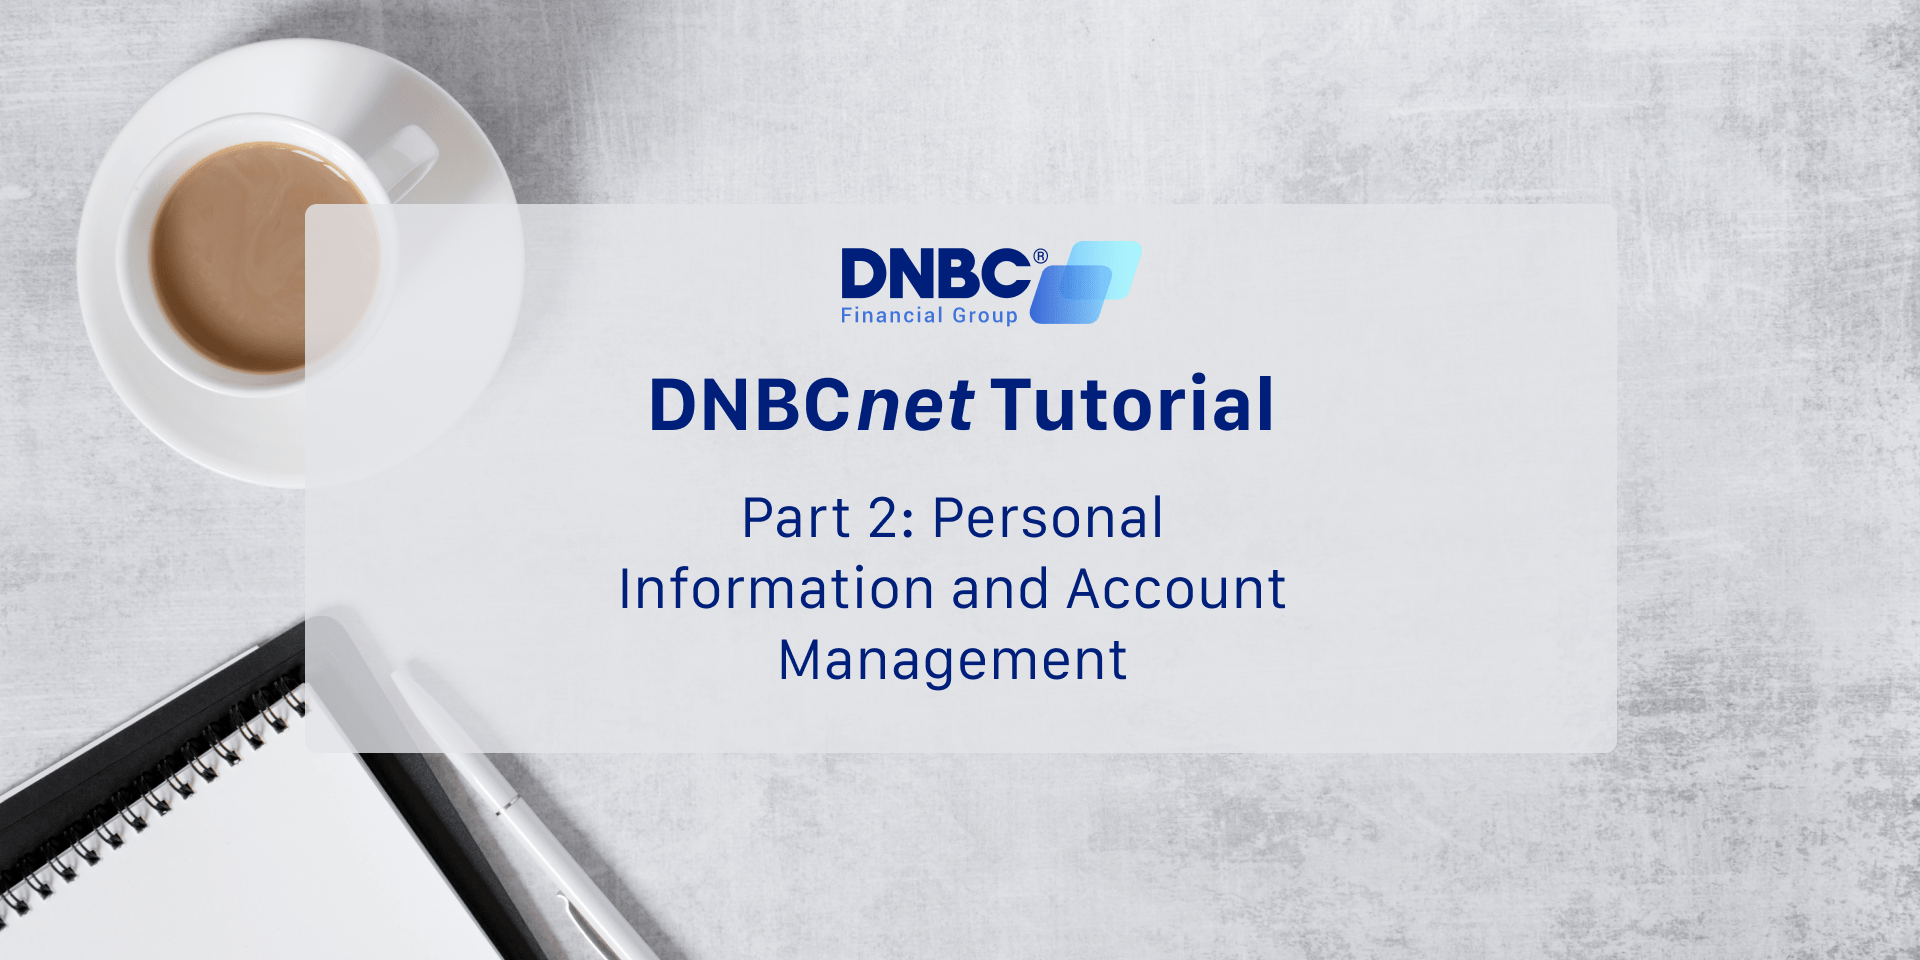 Mastering Personal Information and Account Management on DNBCnet 3.0